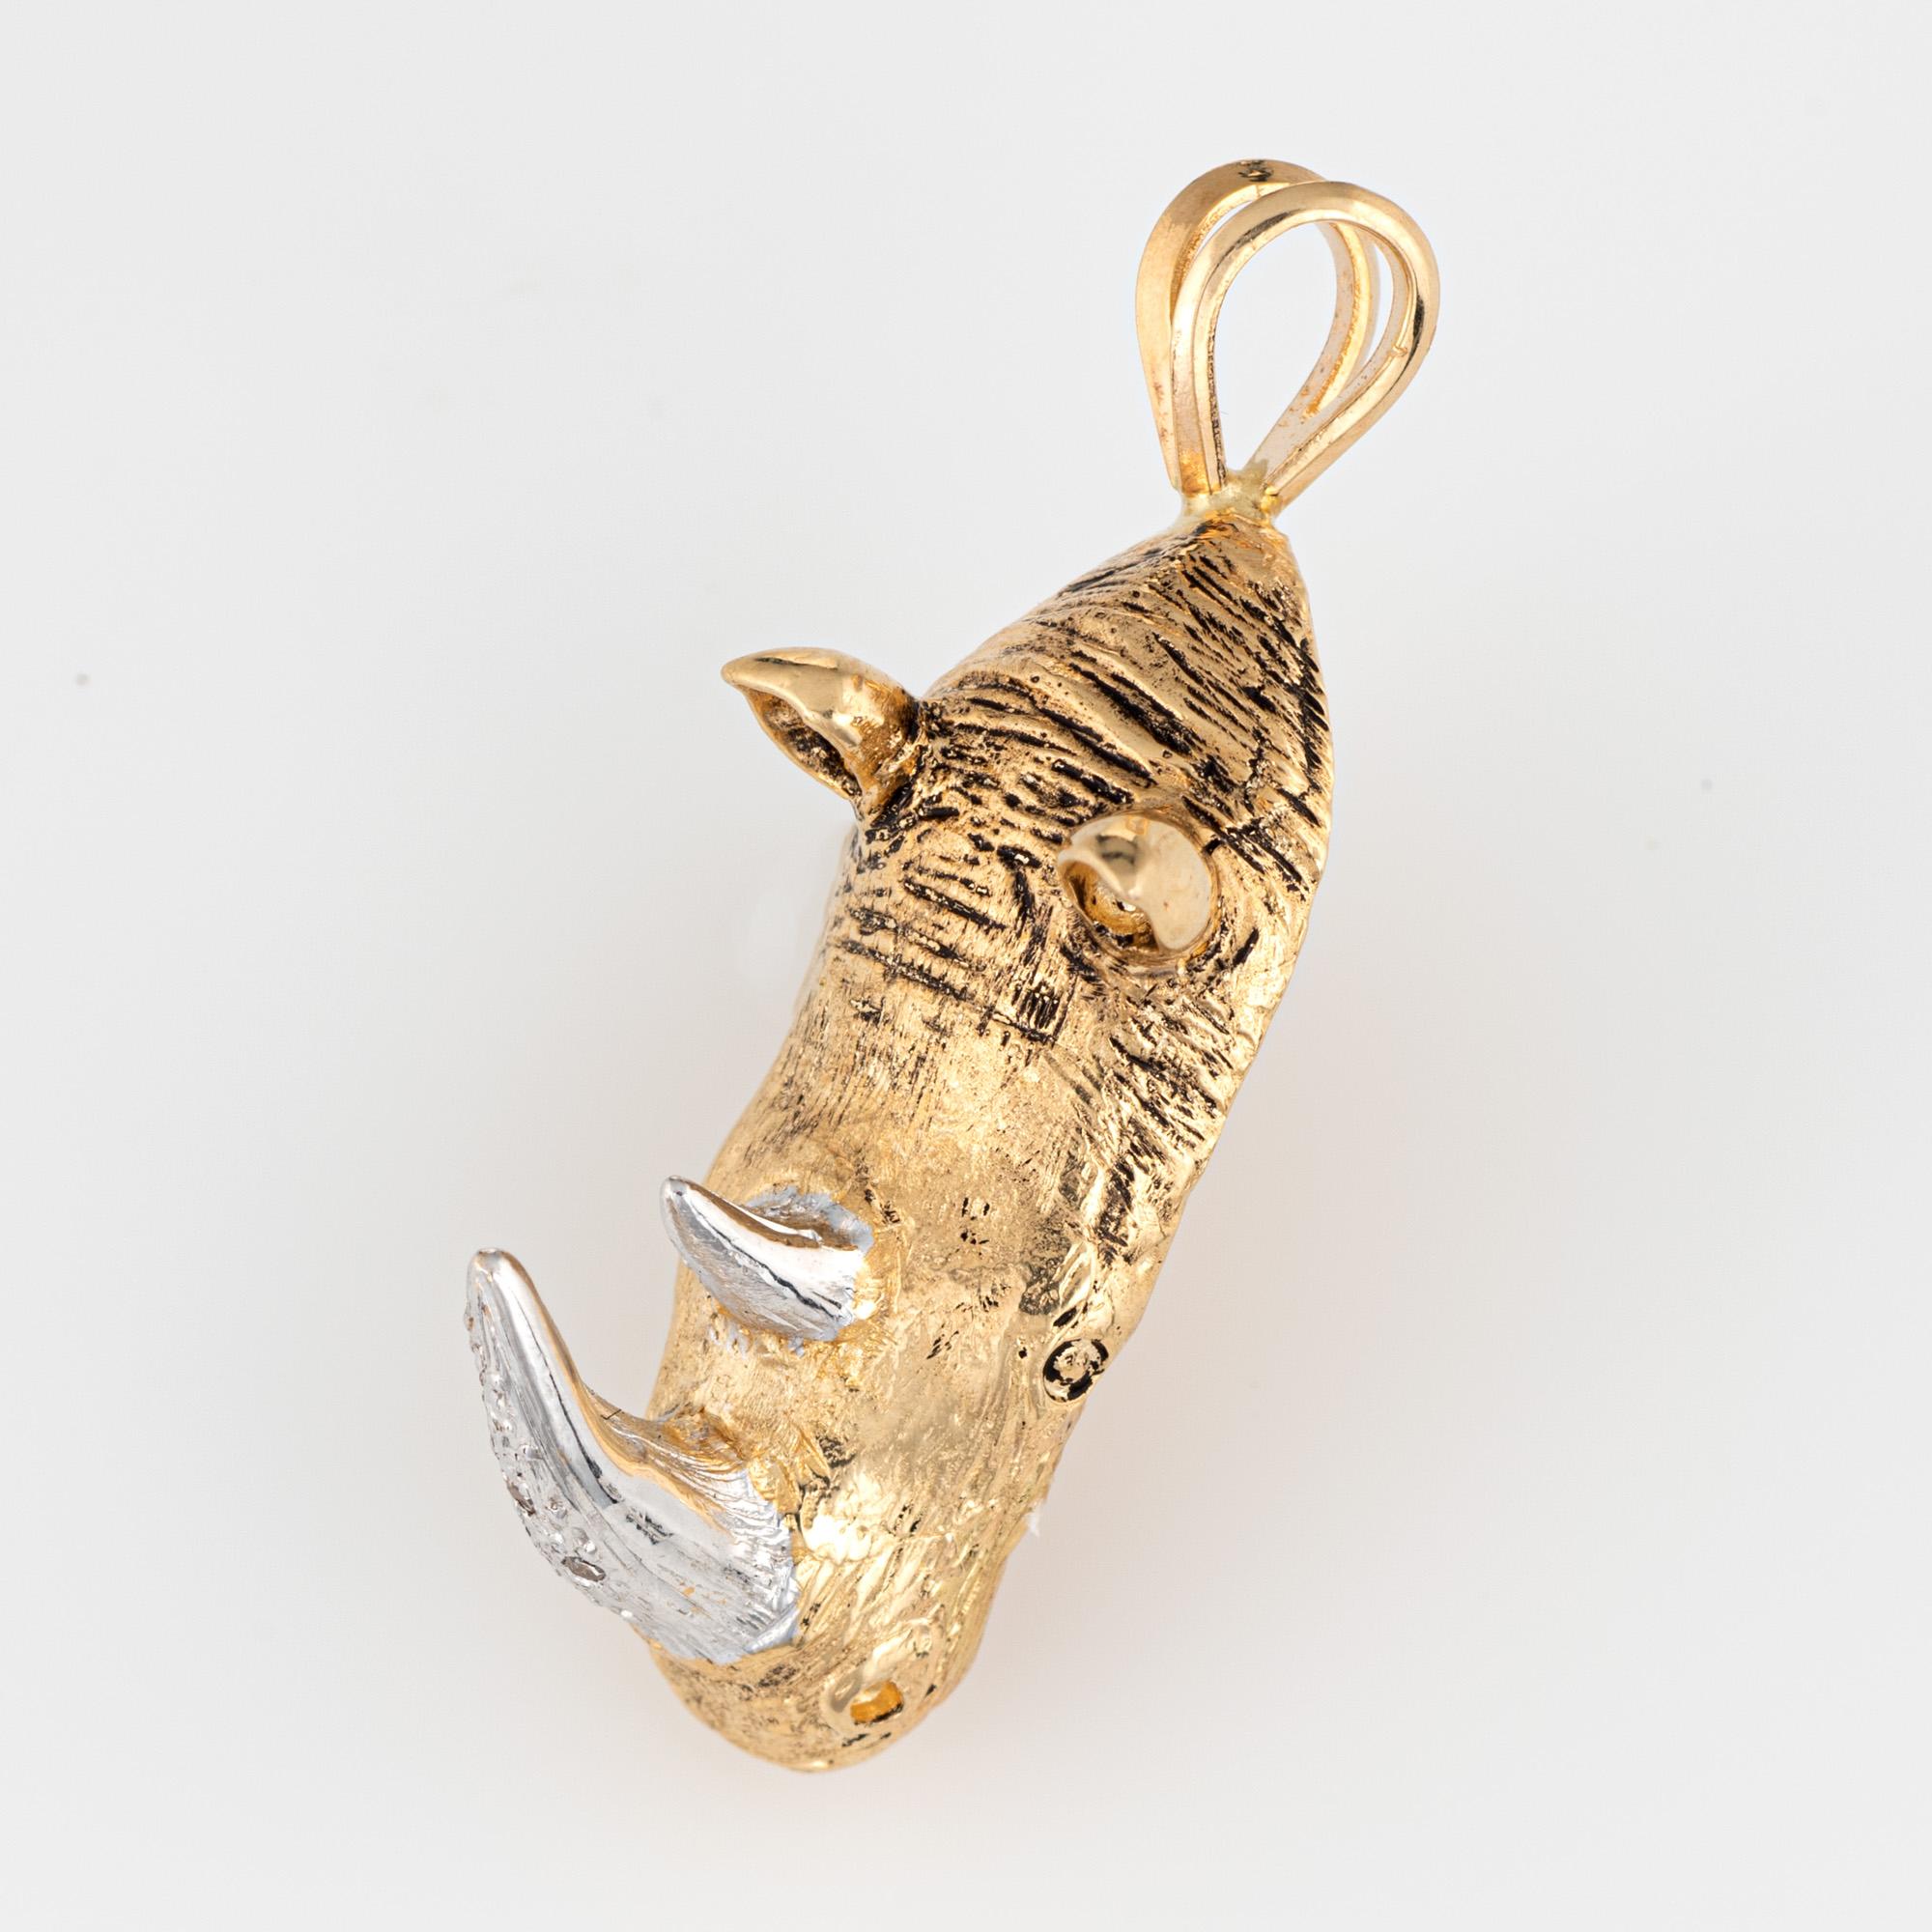 Finely detailed vintage Rhinoceros diamond pendant (circa 1950s to 1960s) crafted in 14k yellow gold.  

Diamonds total an estimated 0.03 carats (estimated at K-L color and I1 clarity). The anchor is set within a ships wheel. Ideal worn as a pendant